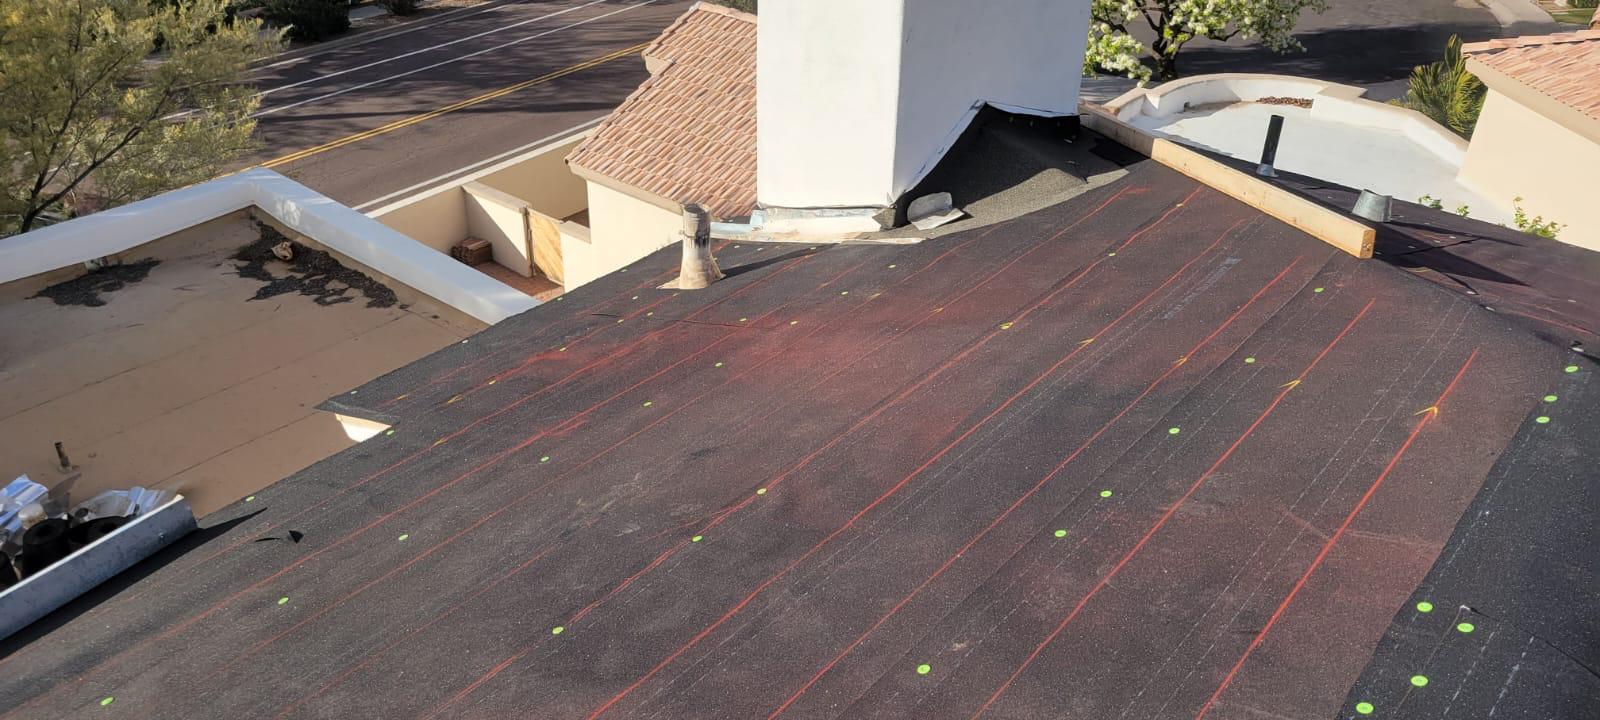 Behmer Roofing showcases their expertise in tile re-felt in Gilbert with underlayment perfectly laid out before tile placement